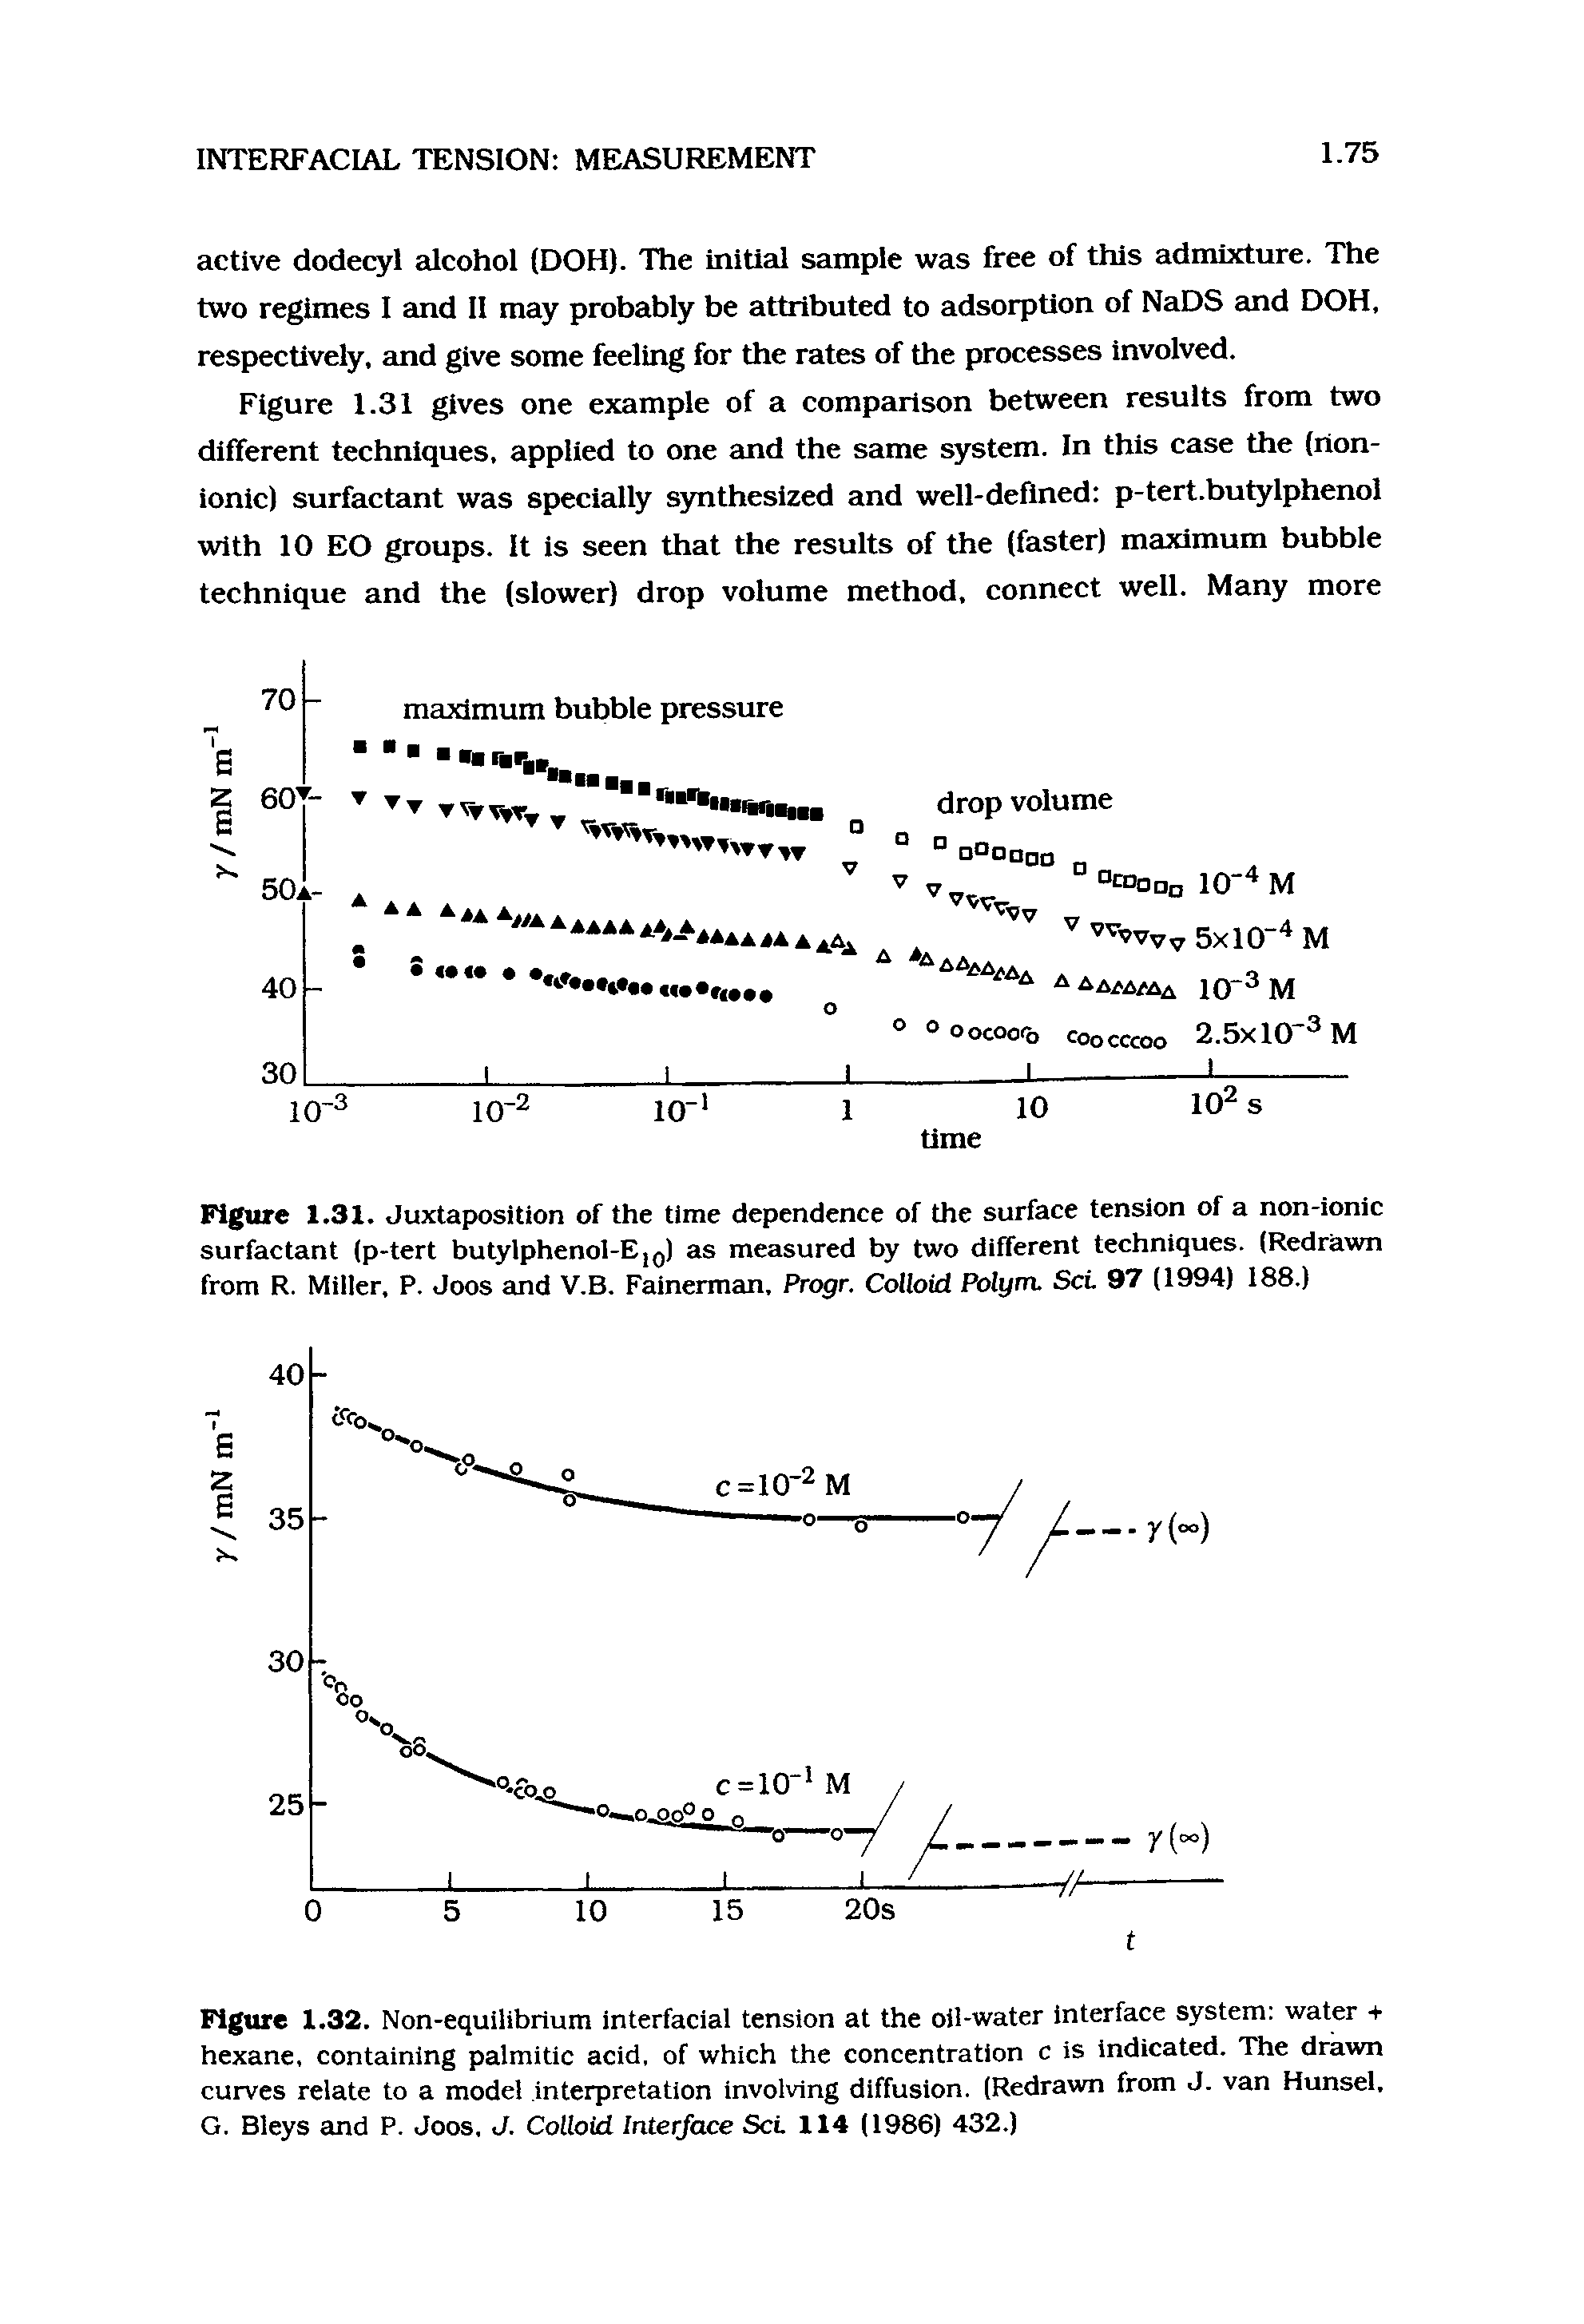 Figure 1.31. Juxtaposition of the time dependence of the surface tension of a non-ionic surfactant (p-tert butylphenol-E,Q) as measured by two different techniques. (Redrawn from R. Miller, P. Joos and V.B. Fainerman, Progr. Colloid Polyrn Set 97 (1994) 188.)...